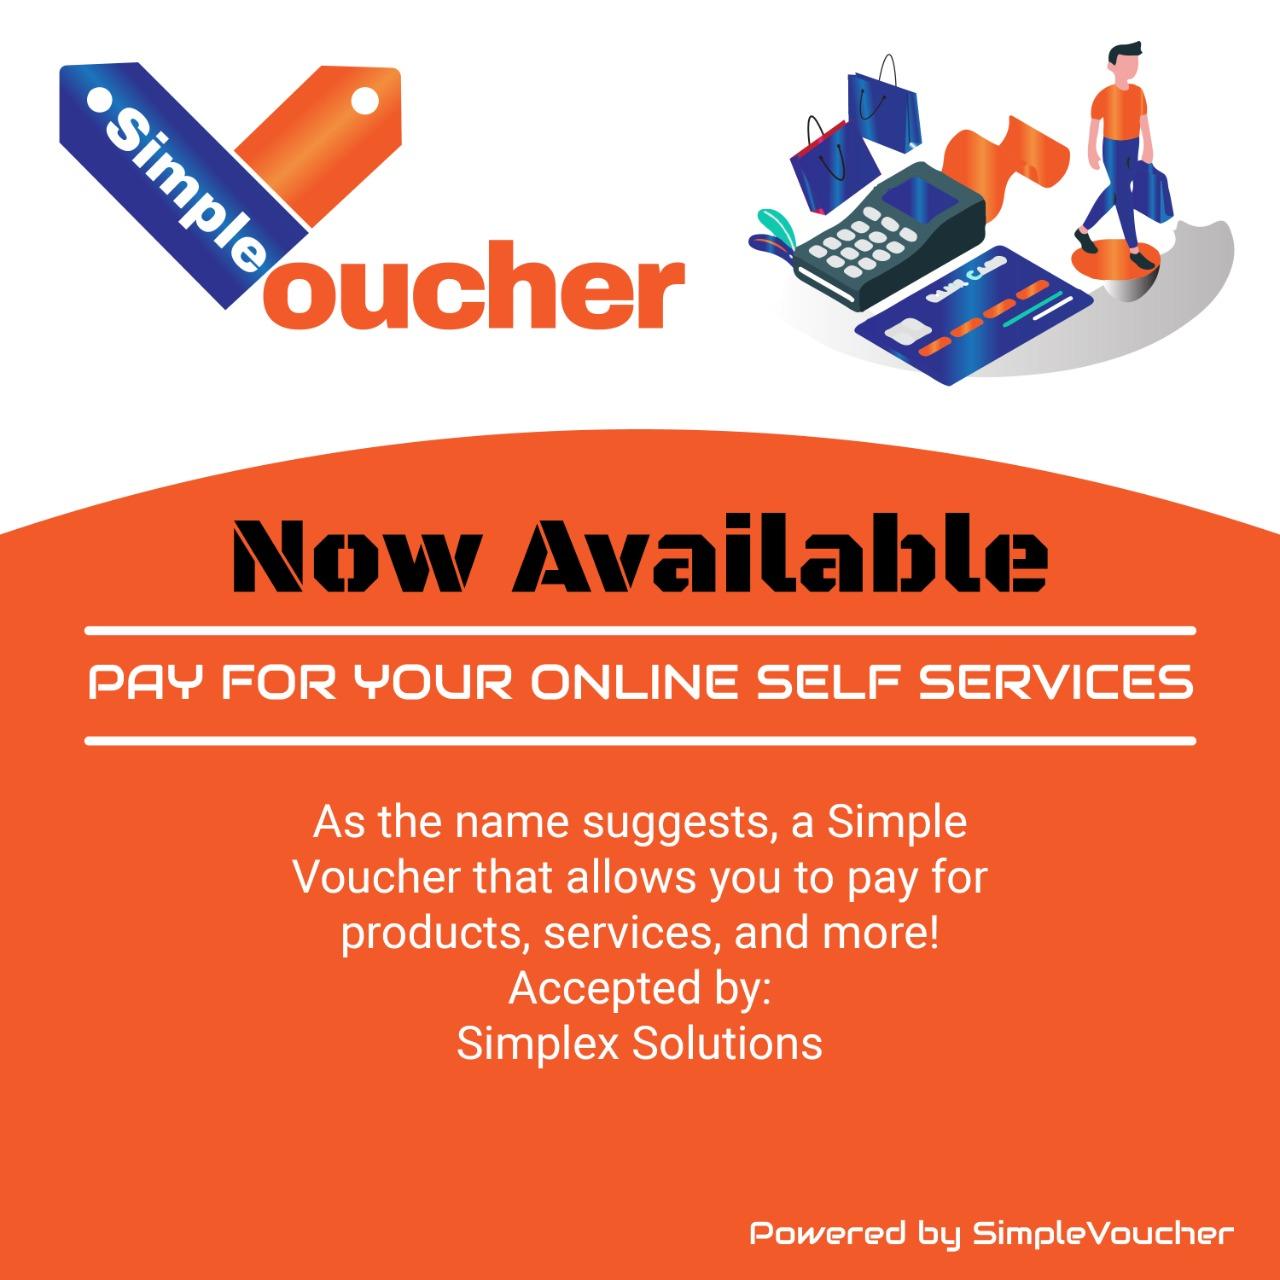 Simple Voucher is a safe and secure Digital Payment